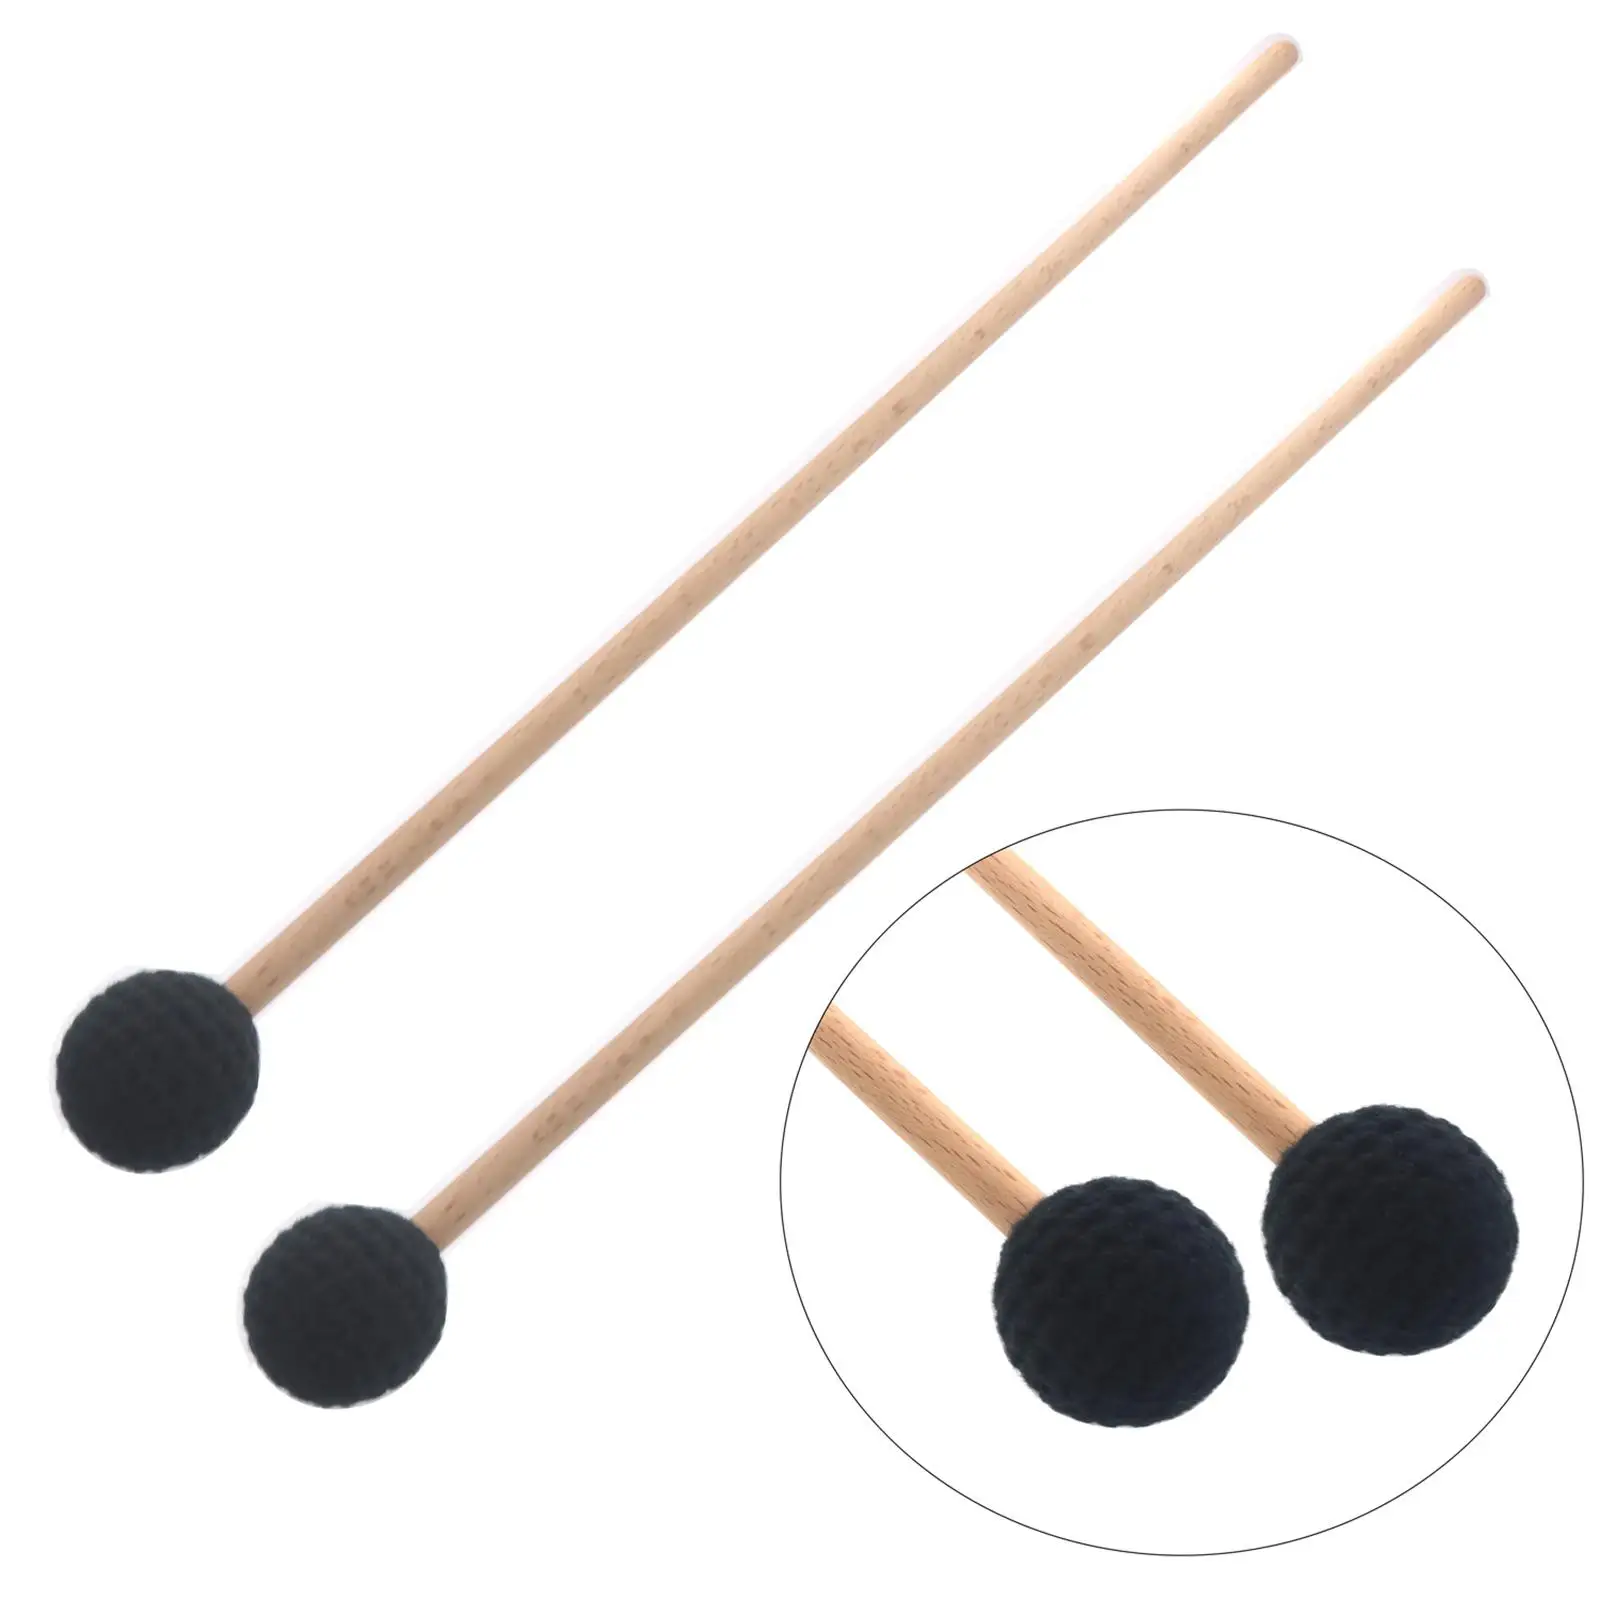 2x Percussion Xylophone Bell Mallets Percussion Instrument Kit Glockenspiel Sticks for Practitioners Gong Woodblock Drum Bells